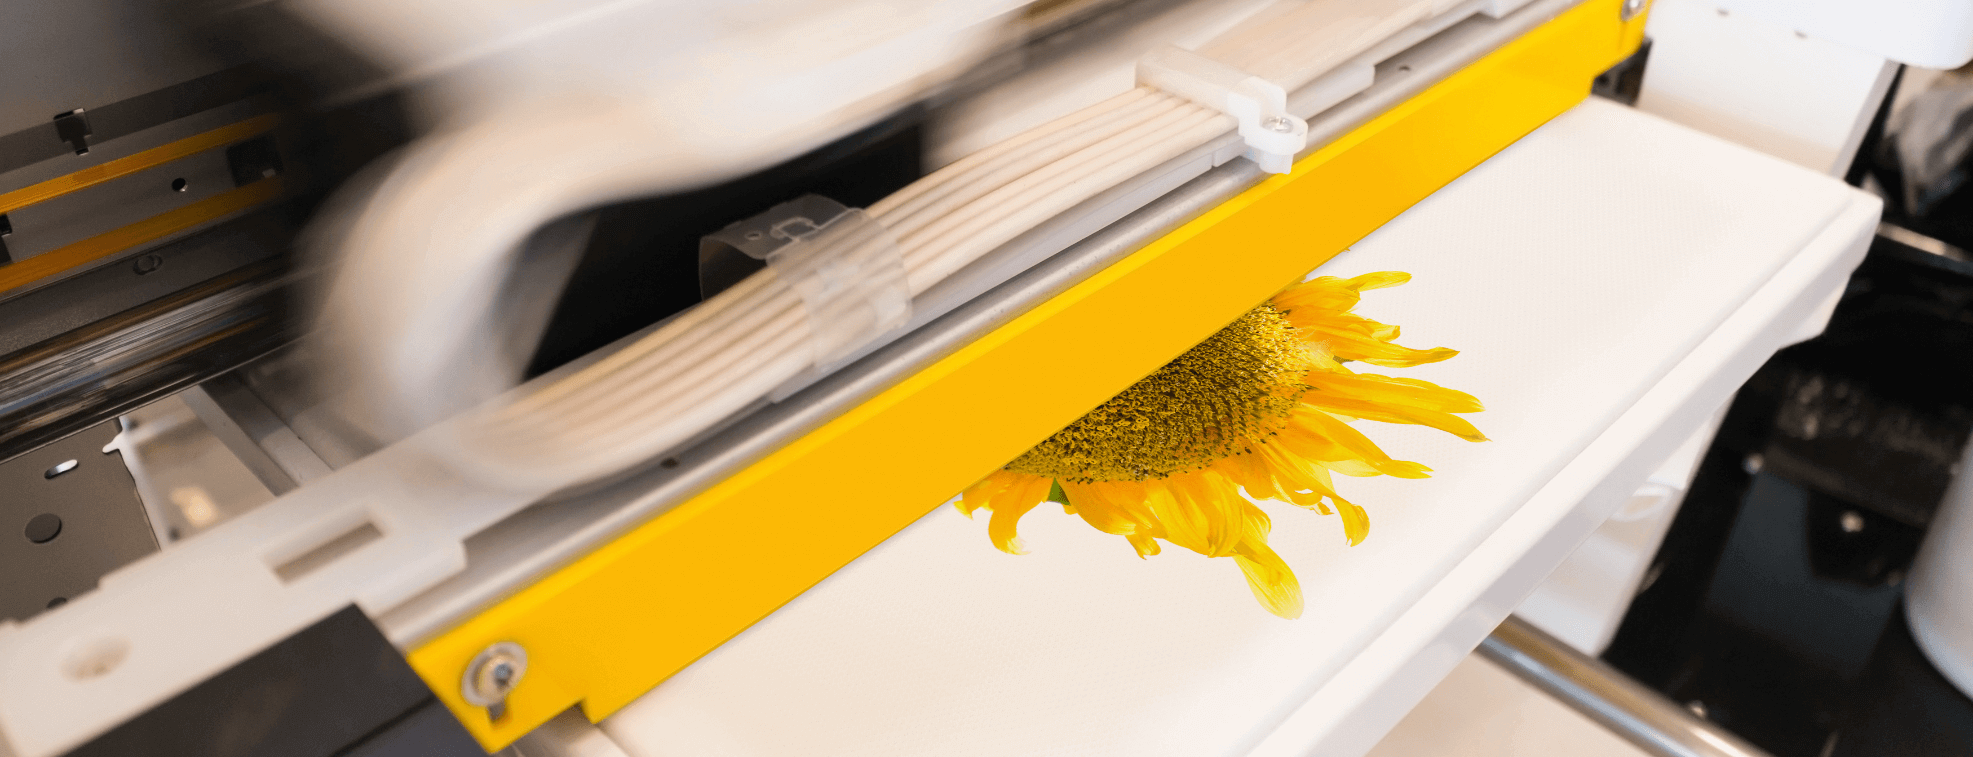 Using digital textile printing to print sunflower on a cotton material